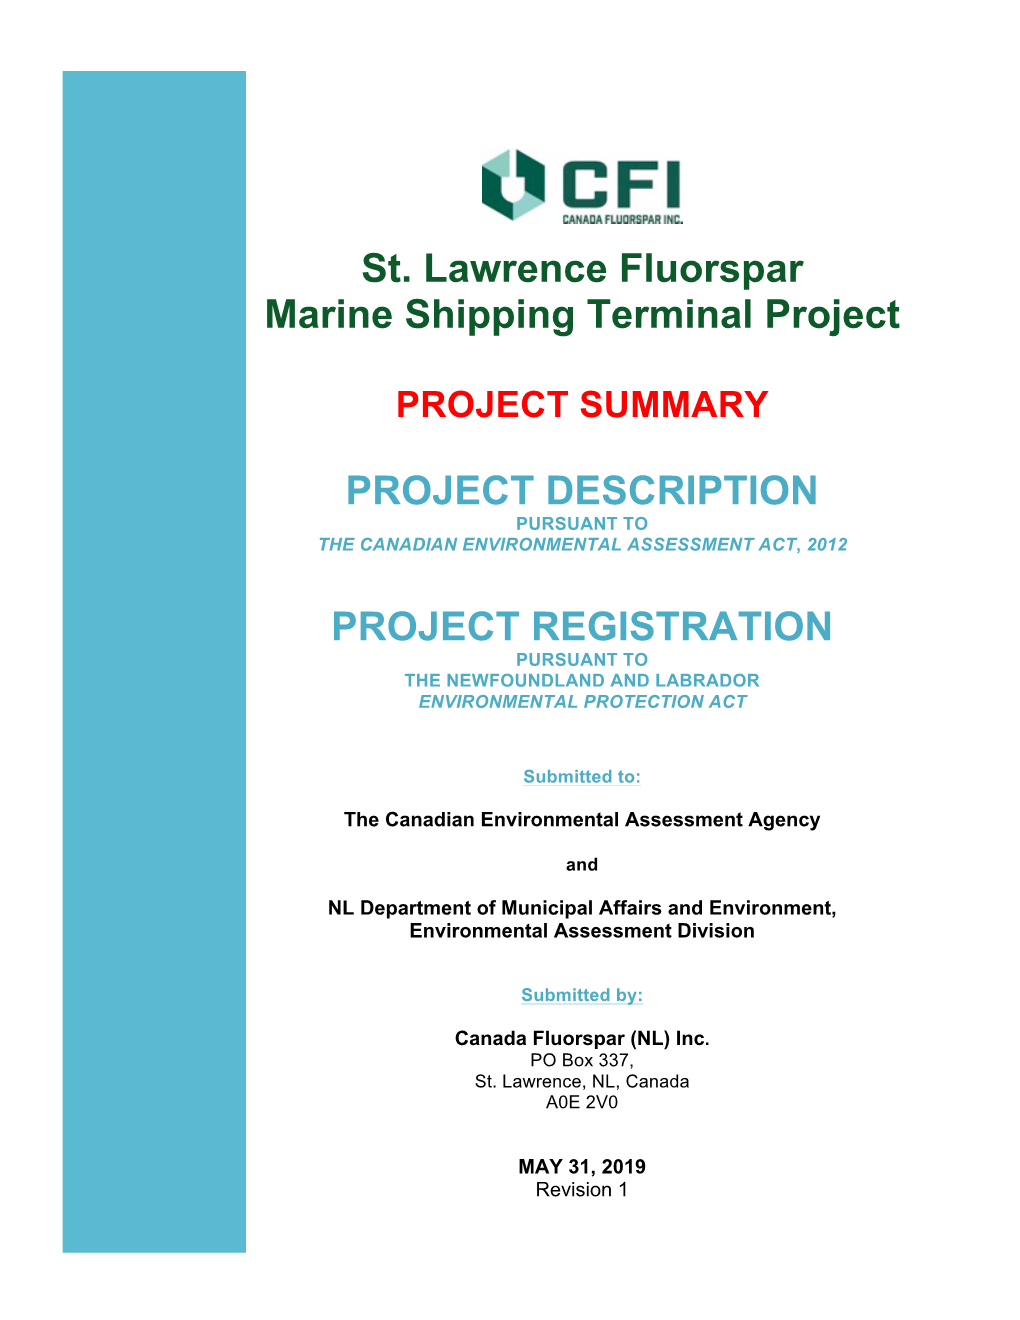 St. Lawrence Fluorspar Marine Shipping Terminal Project